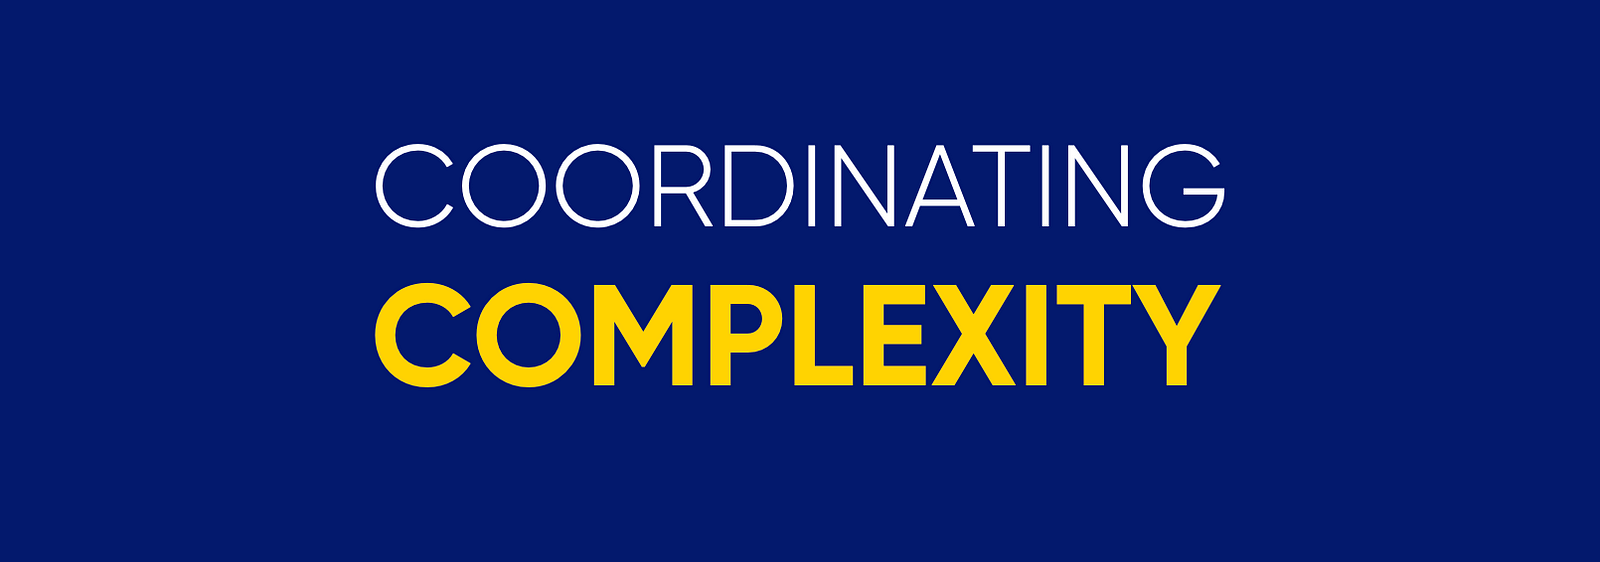 A banner with the words "Coordinating Complexity"